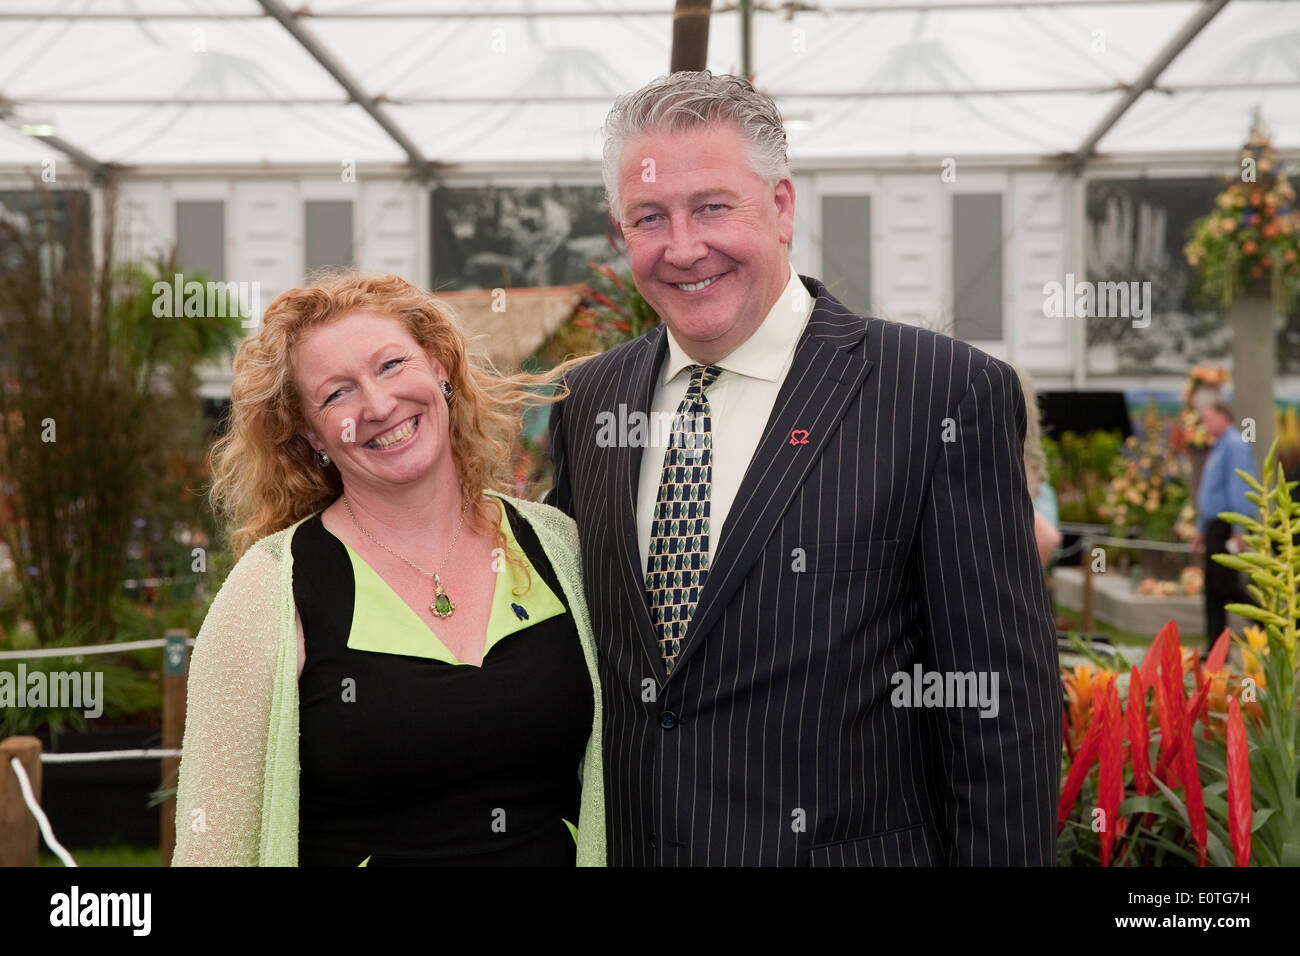 Chelsea, London, UK. 19th May 2014. Charlie Dimmock and Tommy Walsh pose in a marquee at the RHS Chelsea Flower Show 201 Credit: Keith Larby/Alamy Live News Stock Photo